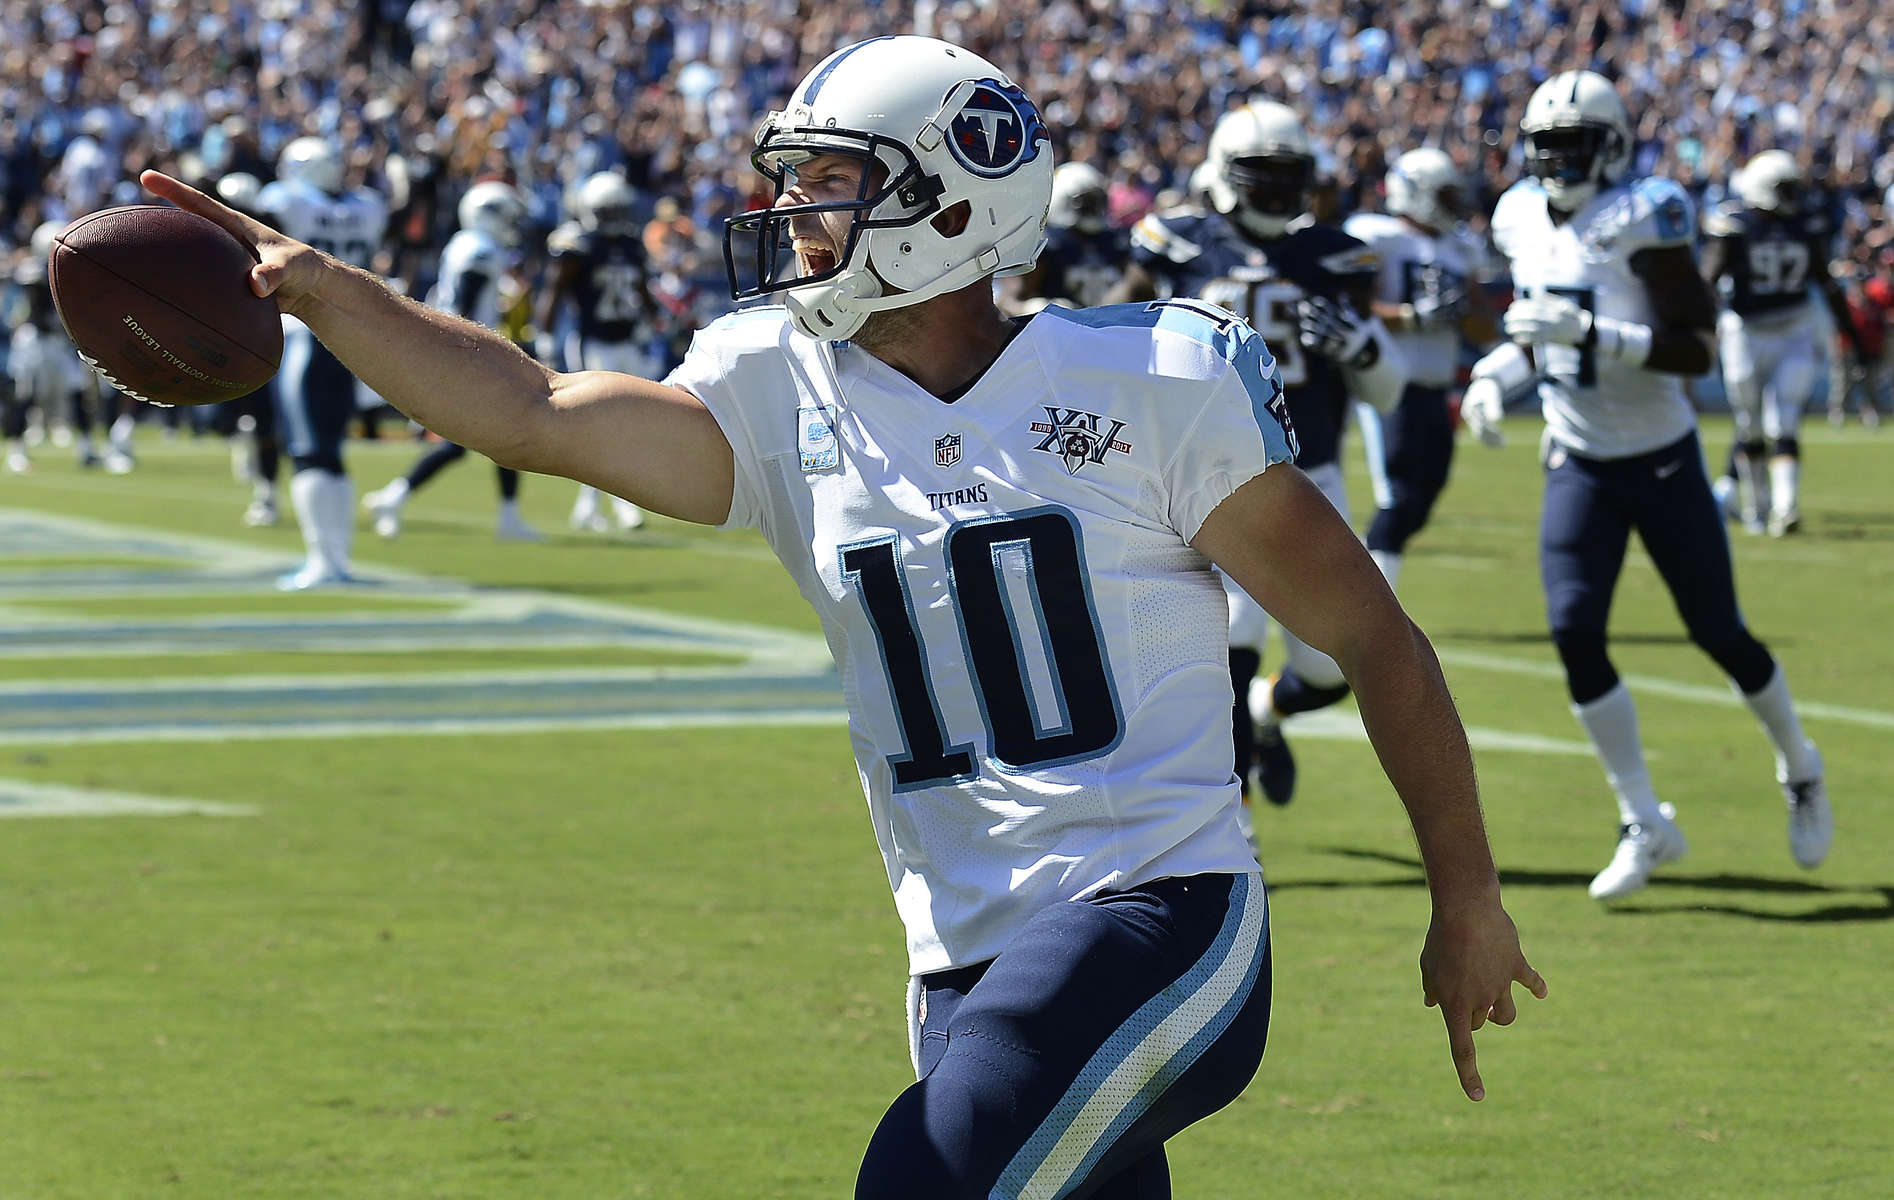 Tennessee Titans quarterback Jake Locker celebrates as he scores a touchdown on a 7-yard run against the San Diego Chargers in the second quarter of an NFL football game on Sept. 22, 2013, in Nashville, Tenn. (AP Photo/ Mark Zaleski)